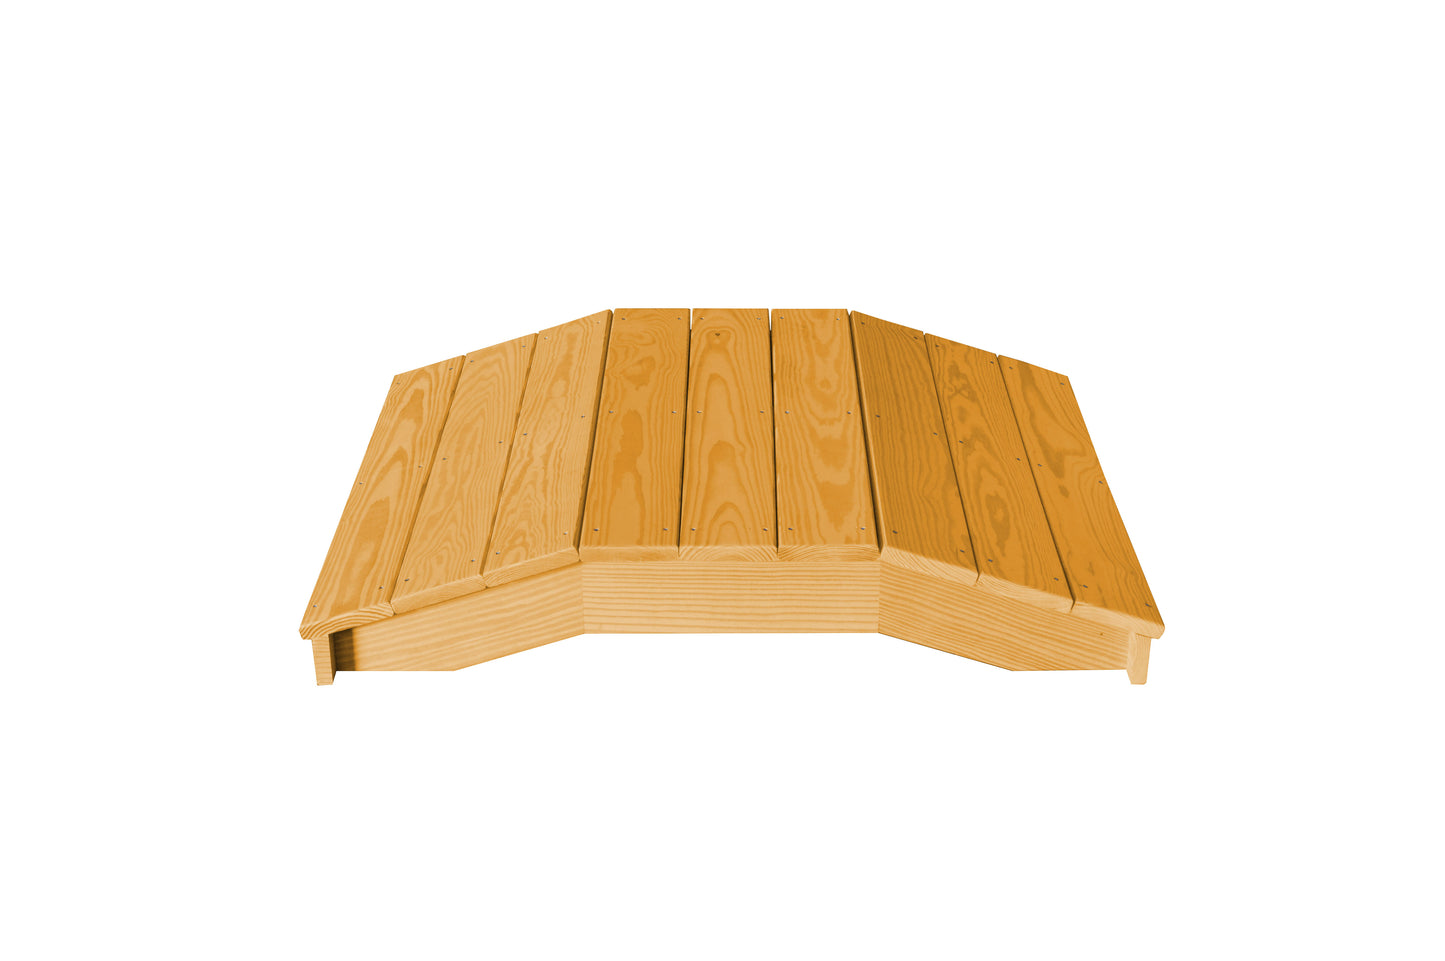 A&L Furniture Pressure Treated Pine 3'  x  4' Standard Plank Bridge - LEAD TIME TO SHIP 10 BUSINESS DAYS